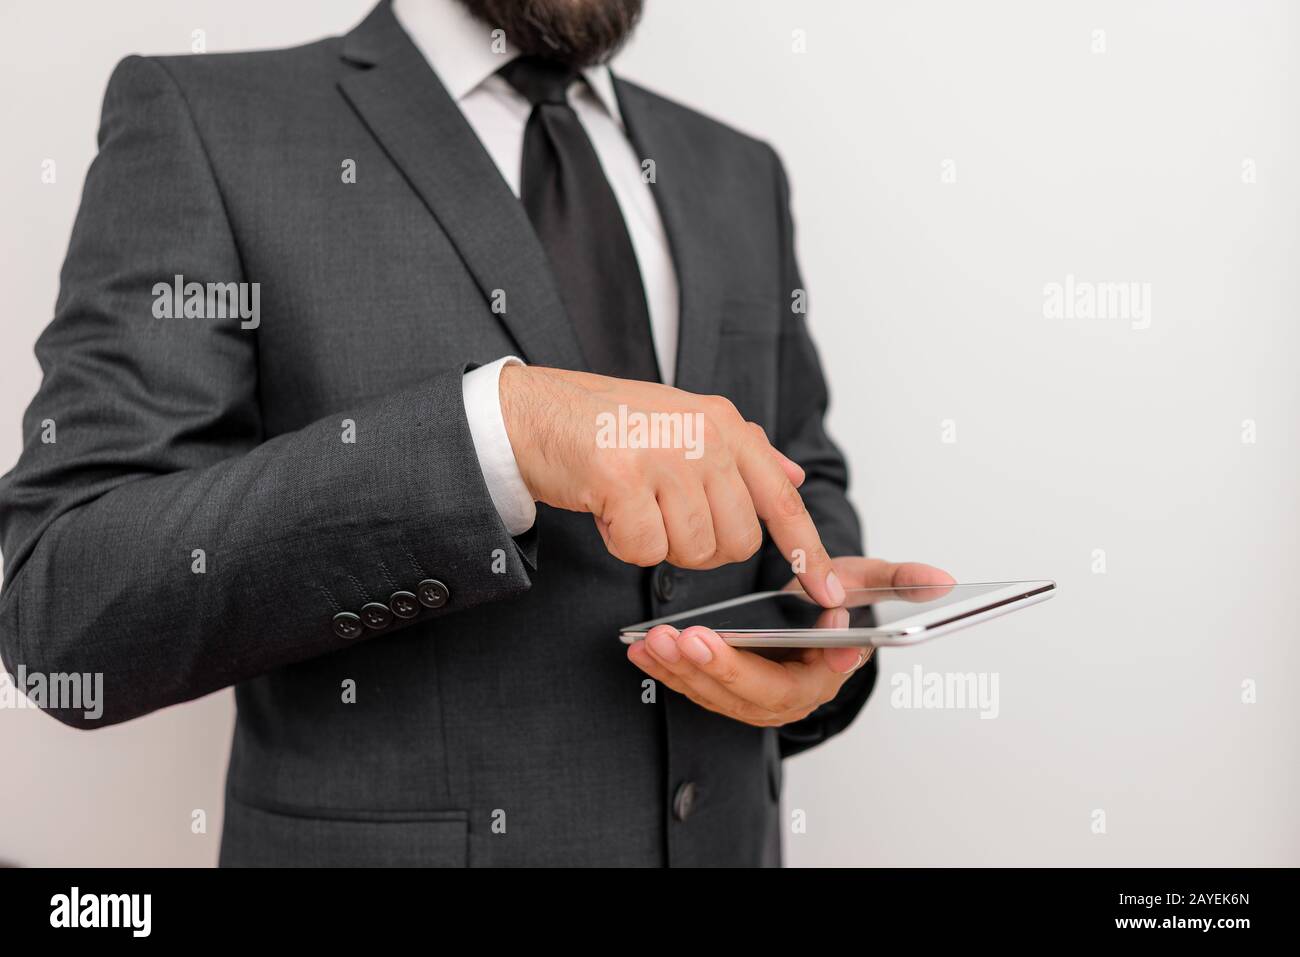 Male human wear formal working clothes presenting presentation of high technology smartphone device. Man dressed in work suit pl Stock Photo